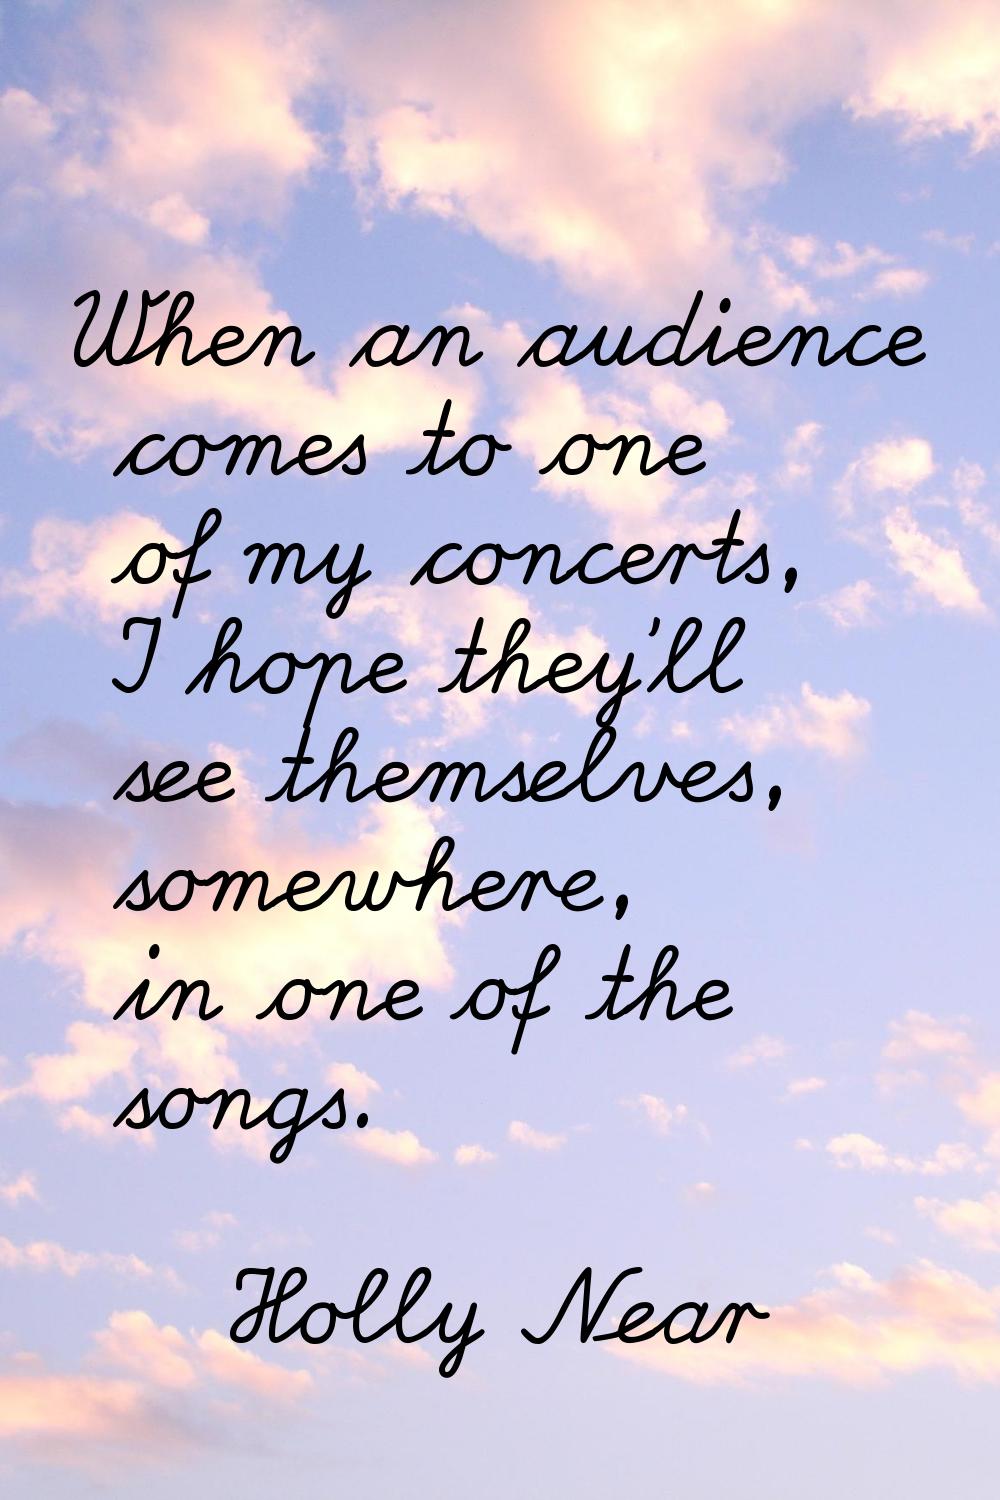 When an audience comes to one of my concerts, I hope they'll see themselves, somewhere, in one of t